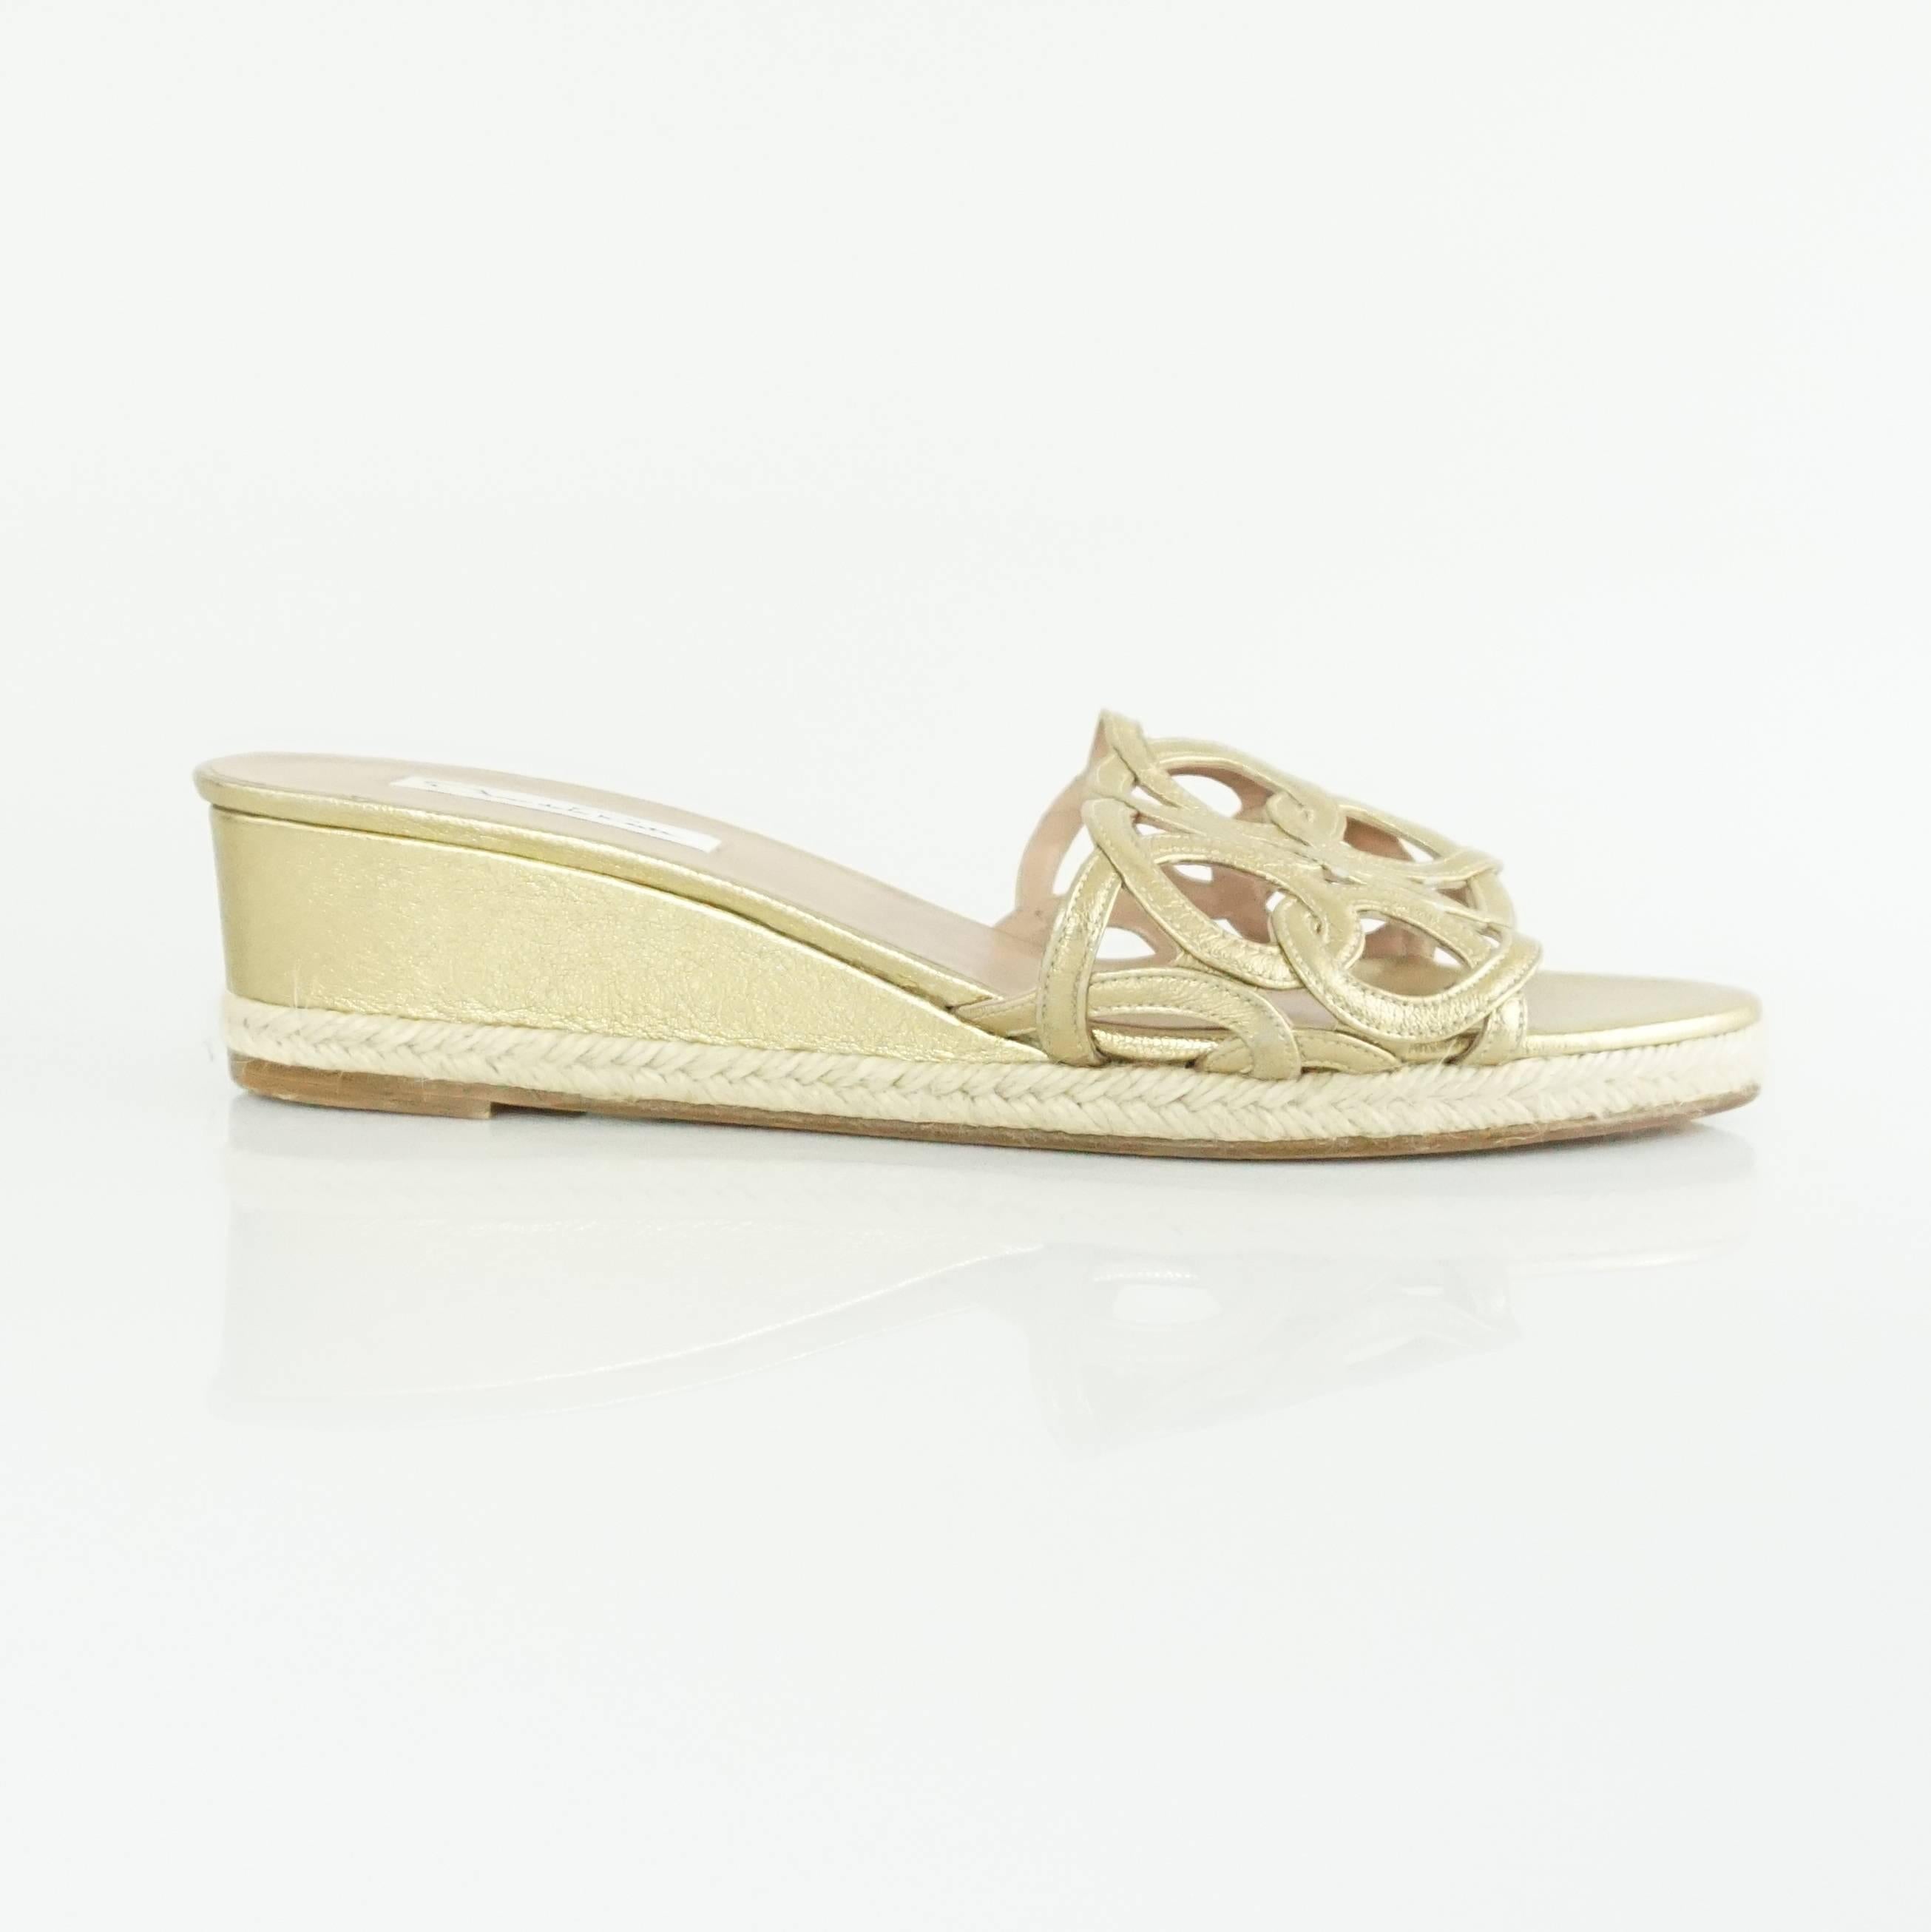 These Oscar de la Renta low wedges have a gold cutout strap. There is a braided rope trim and the shoes are a metallic gold. They are in very good condition with minor bottom wear and minor scuffing on the strap.

Measurements
Wedge Height: